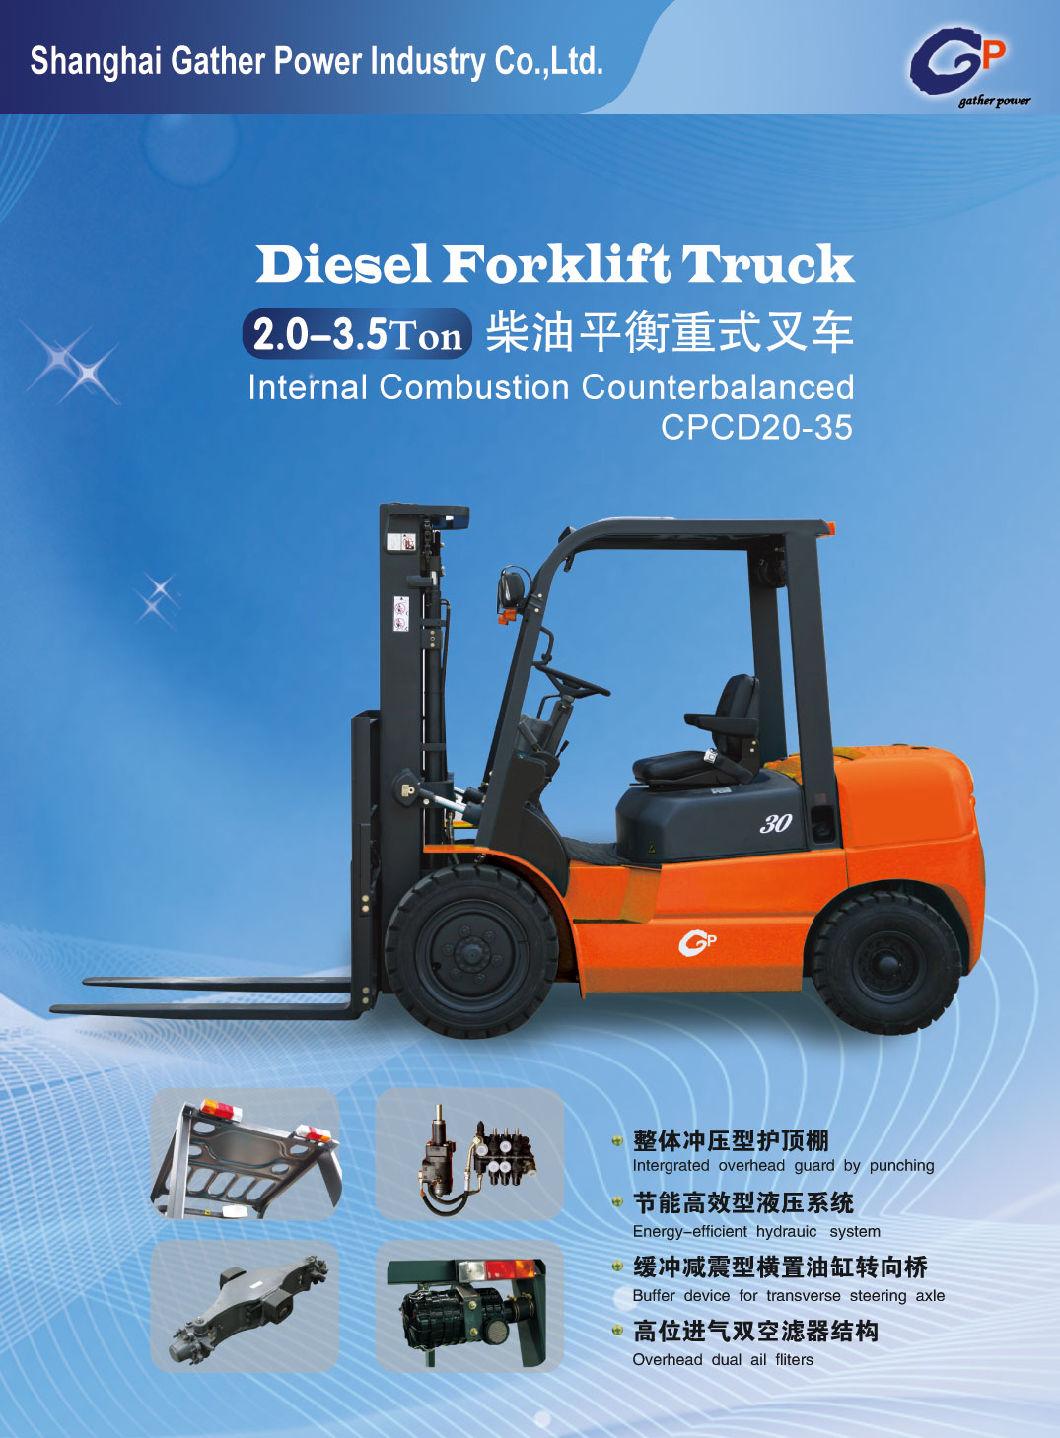 China Made 3.5 Tons Diesel Forklift with Japanese Top Technology (CPCD25)